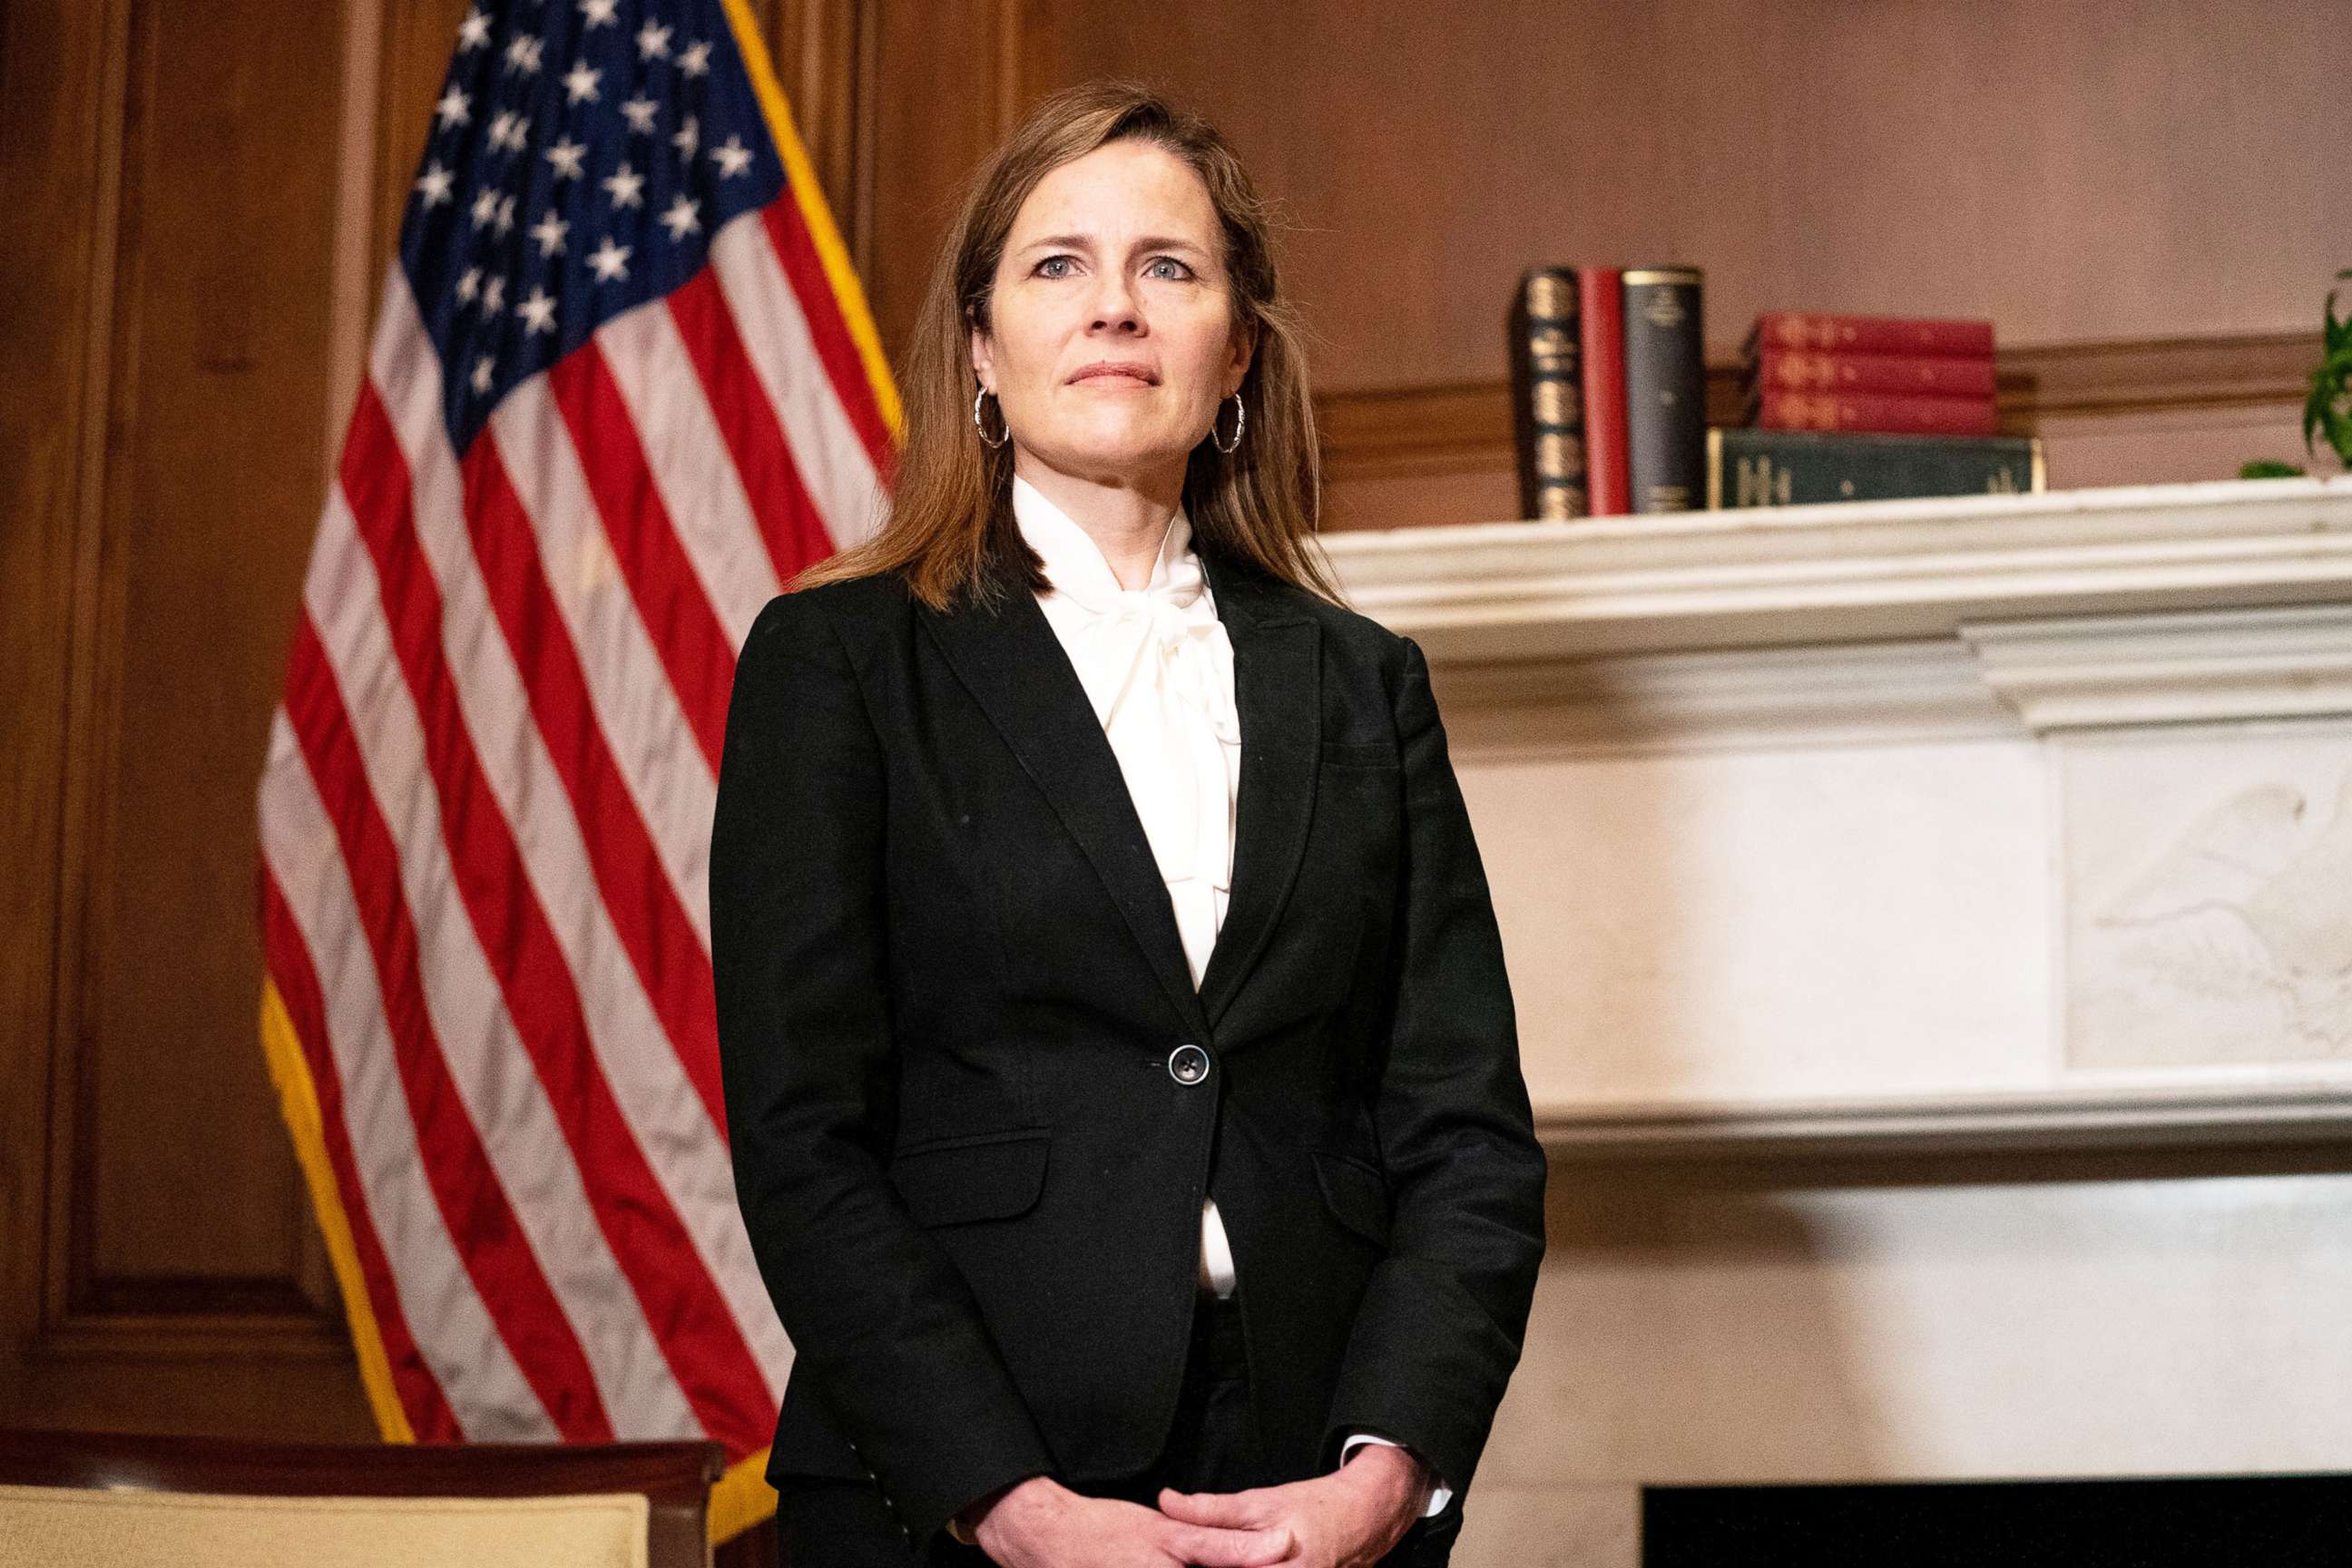 Amy Coney Barrett to focus on family, morals, judicial philosophy in  opening remarks - ABC News